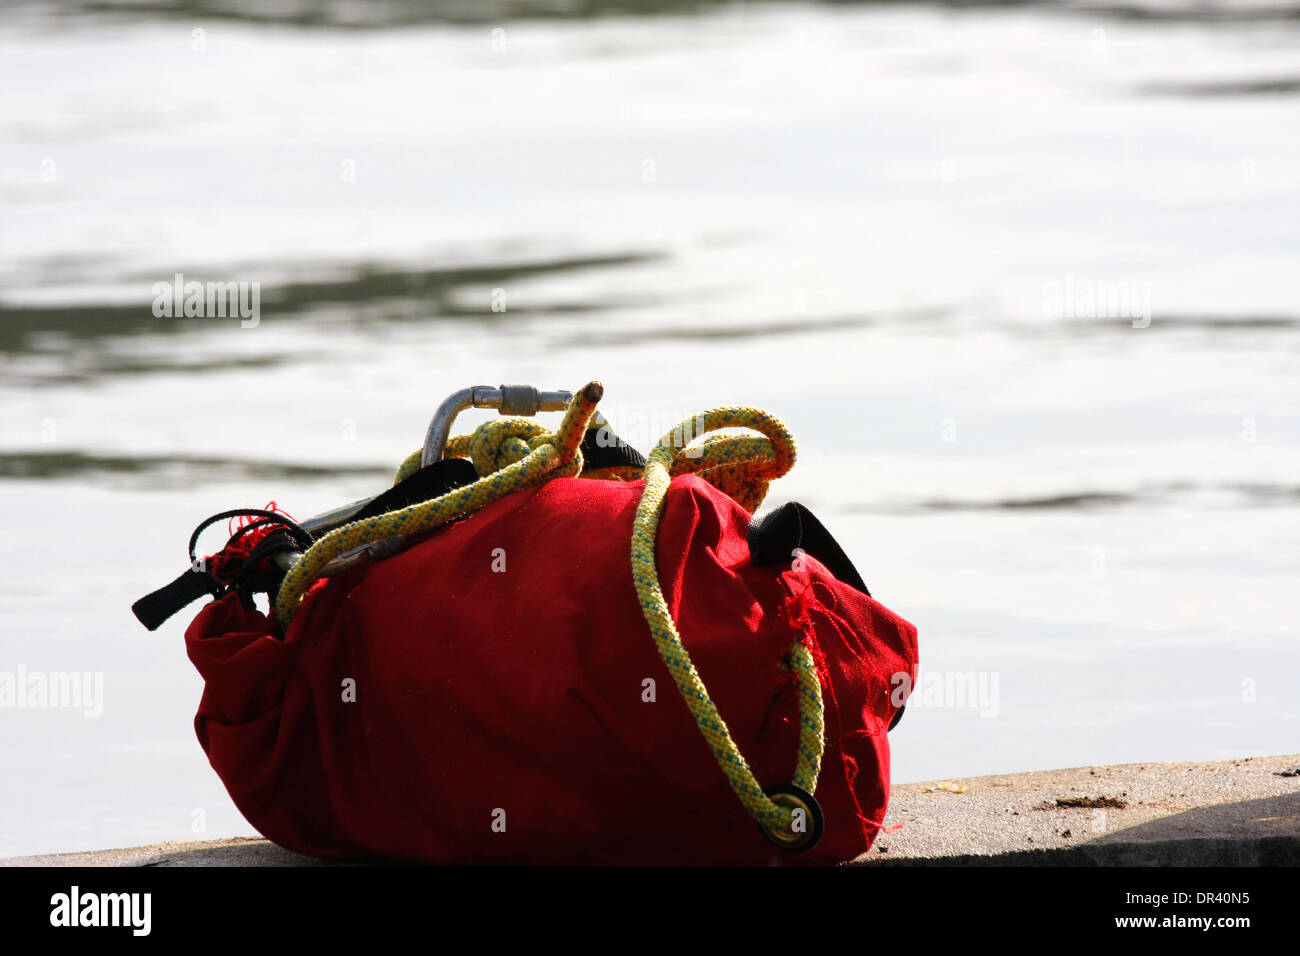 Dive team search and rescue rope bag ready to use in a search dive effort Stock Photo